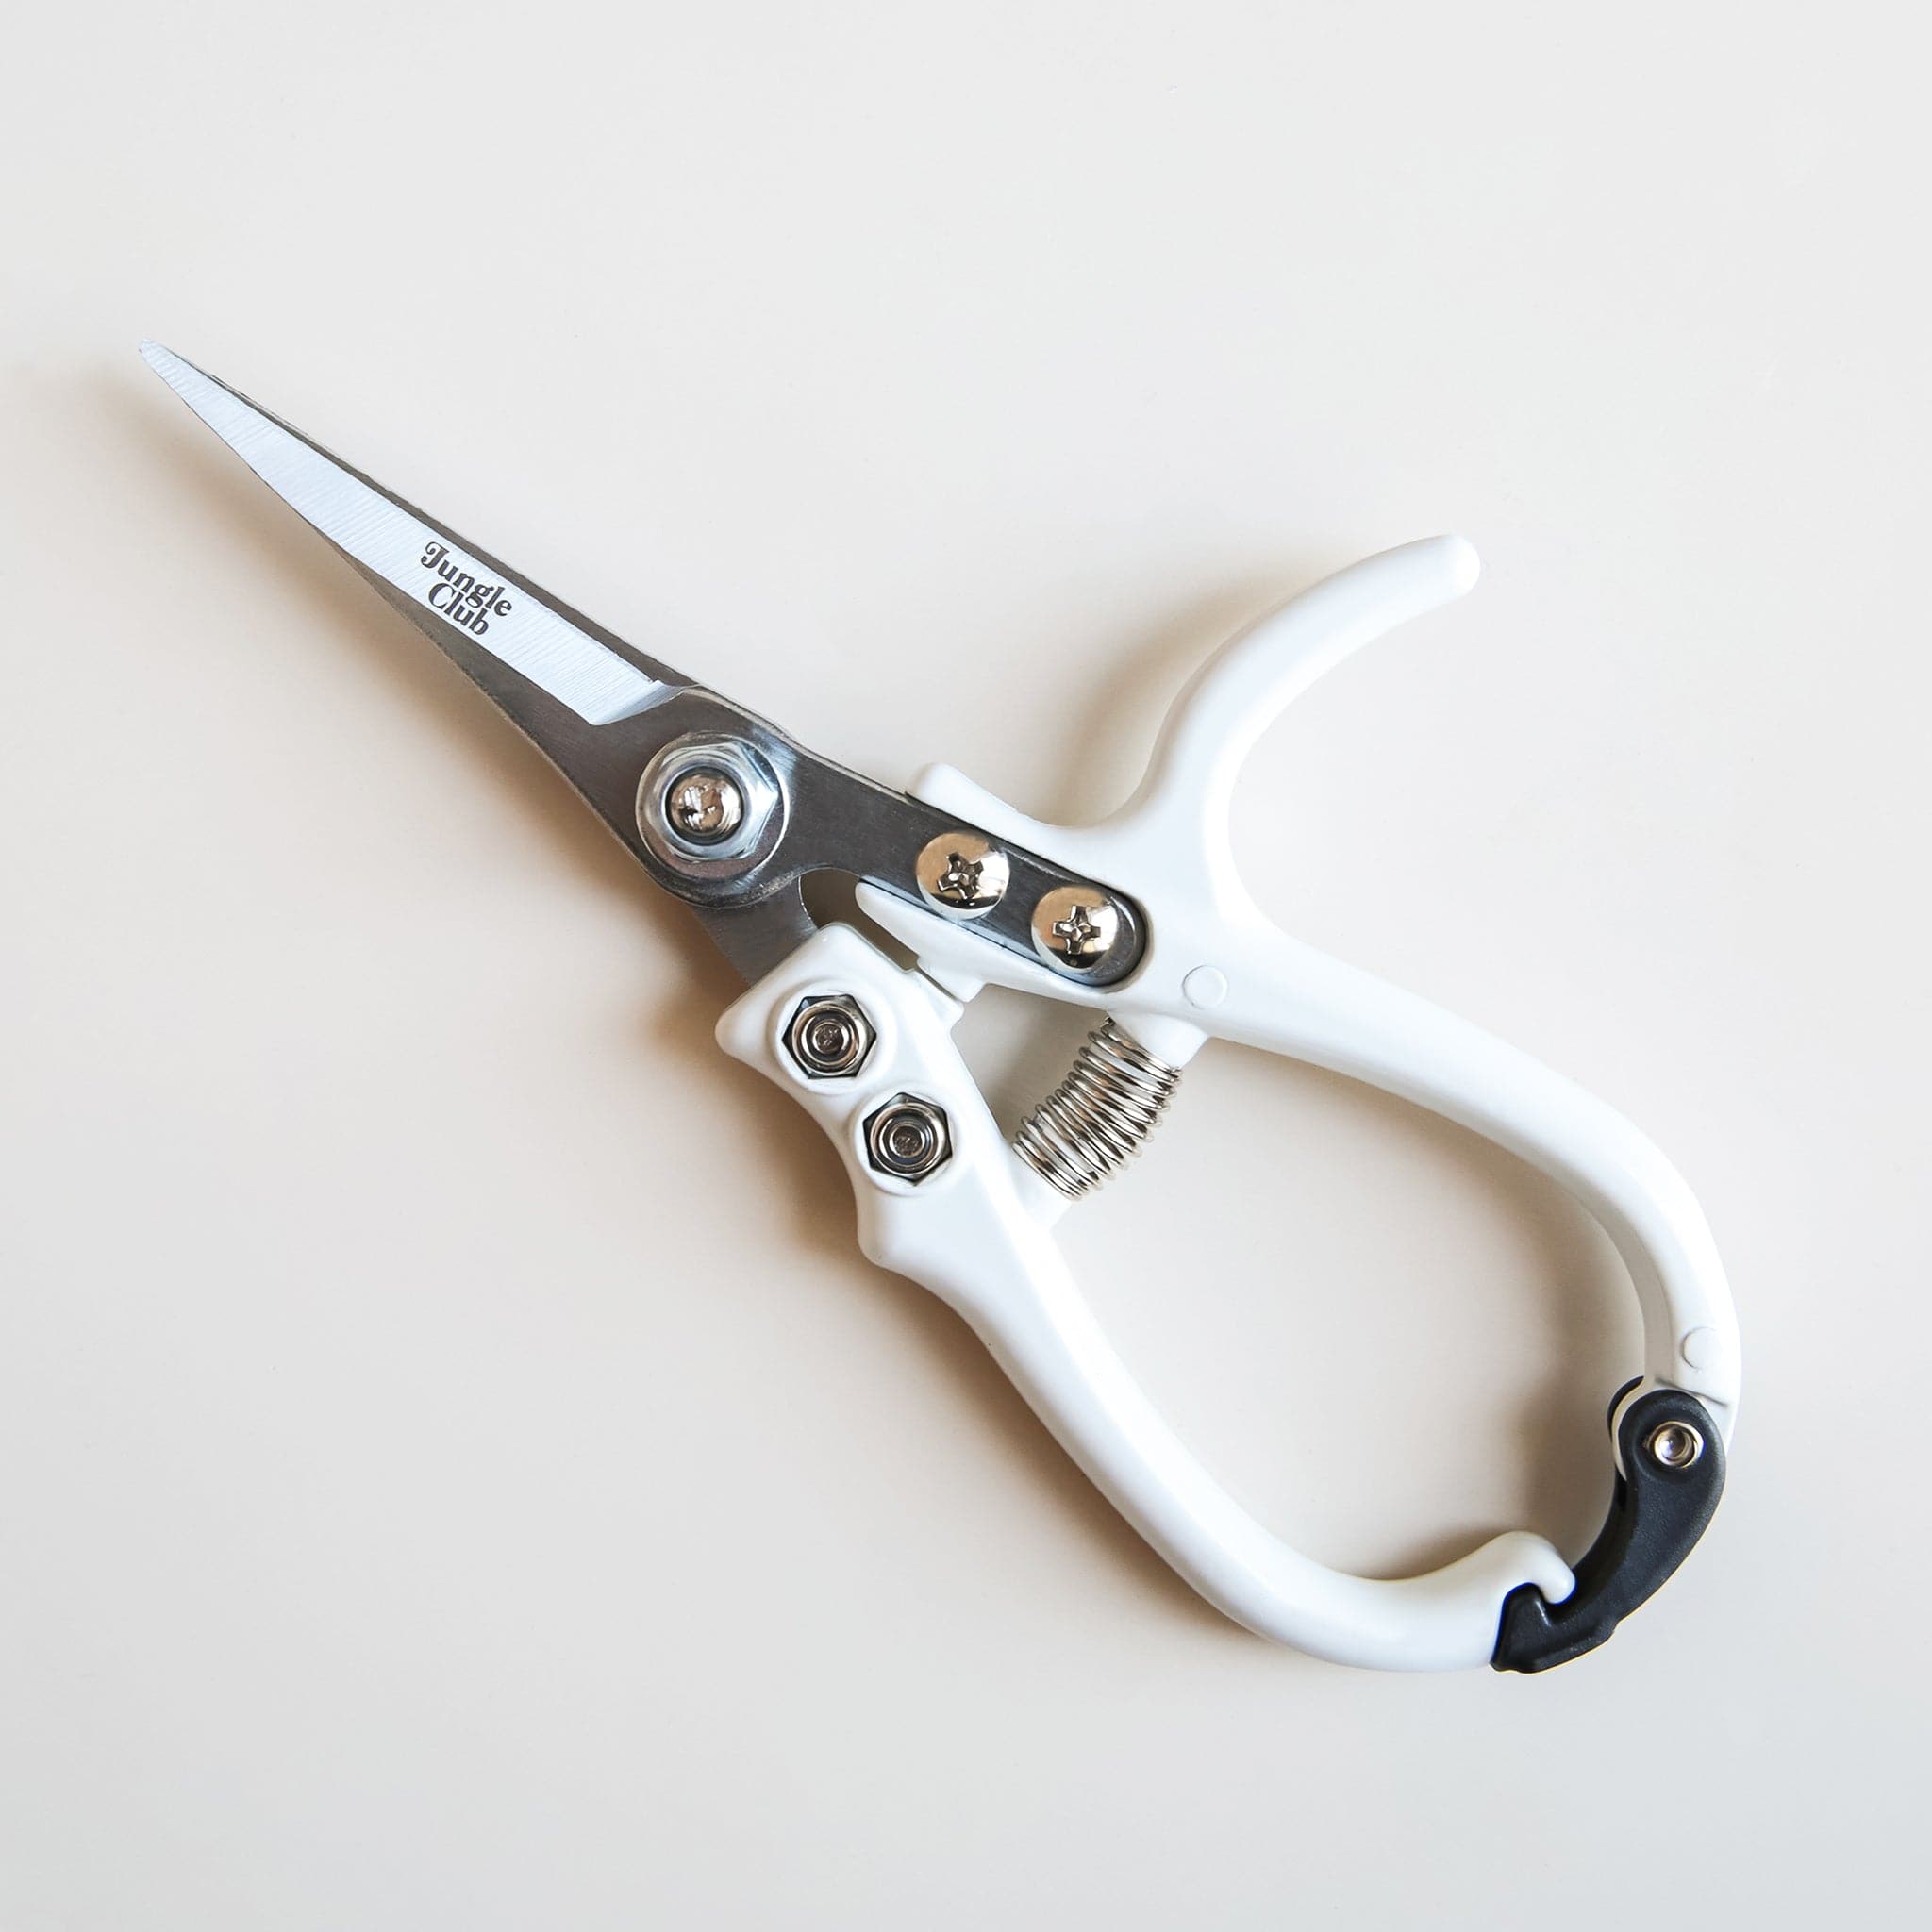 Pair of pruning shears with white handles and metal blades. The outer blade reads &#39;jungle club&#39; in small, playful lettering. The pruning shears have a black clasp at the top of the handles to secure them closed.